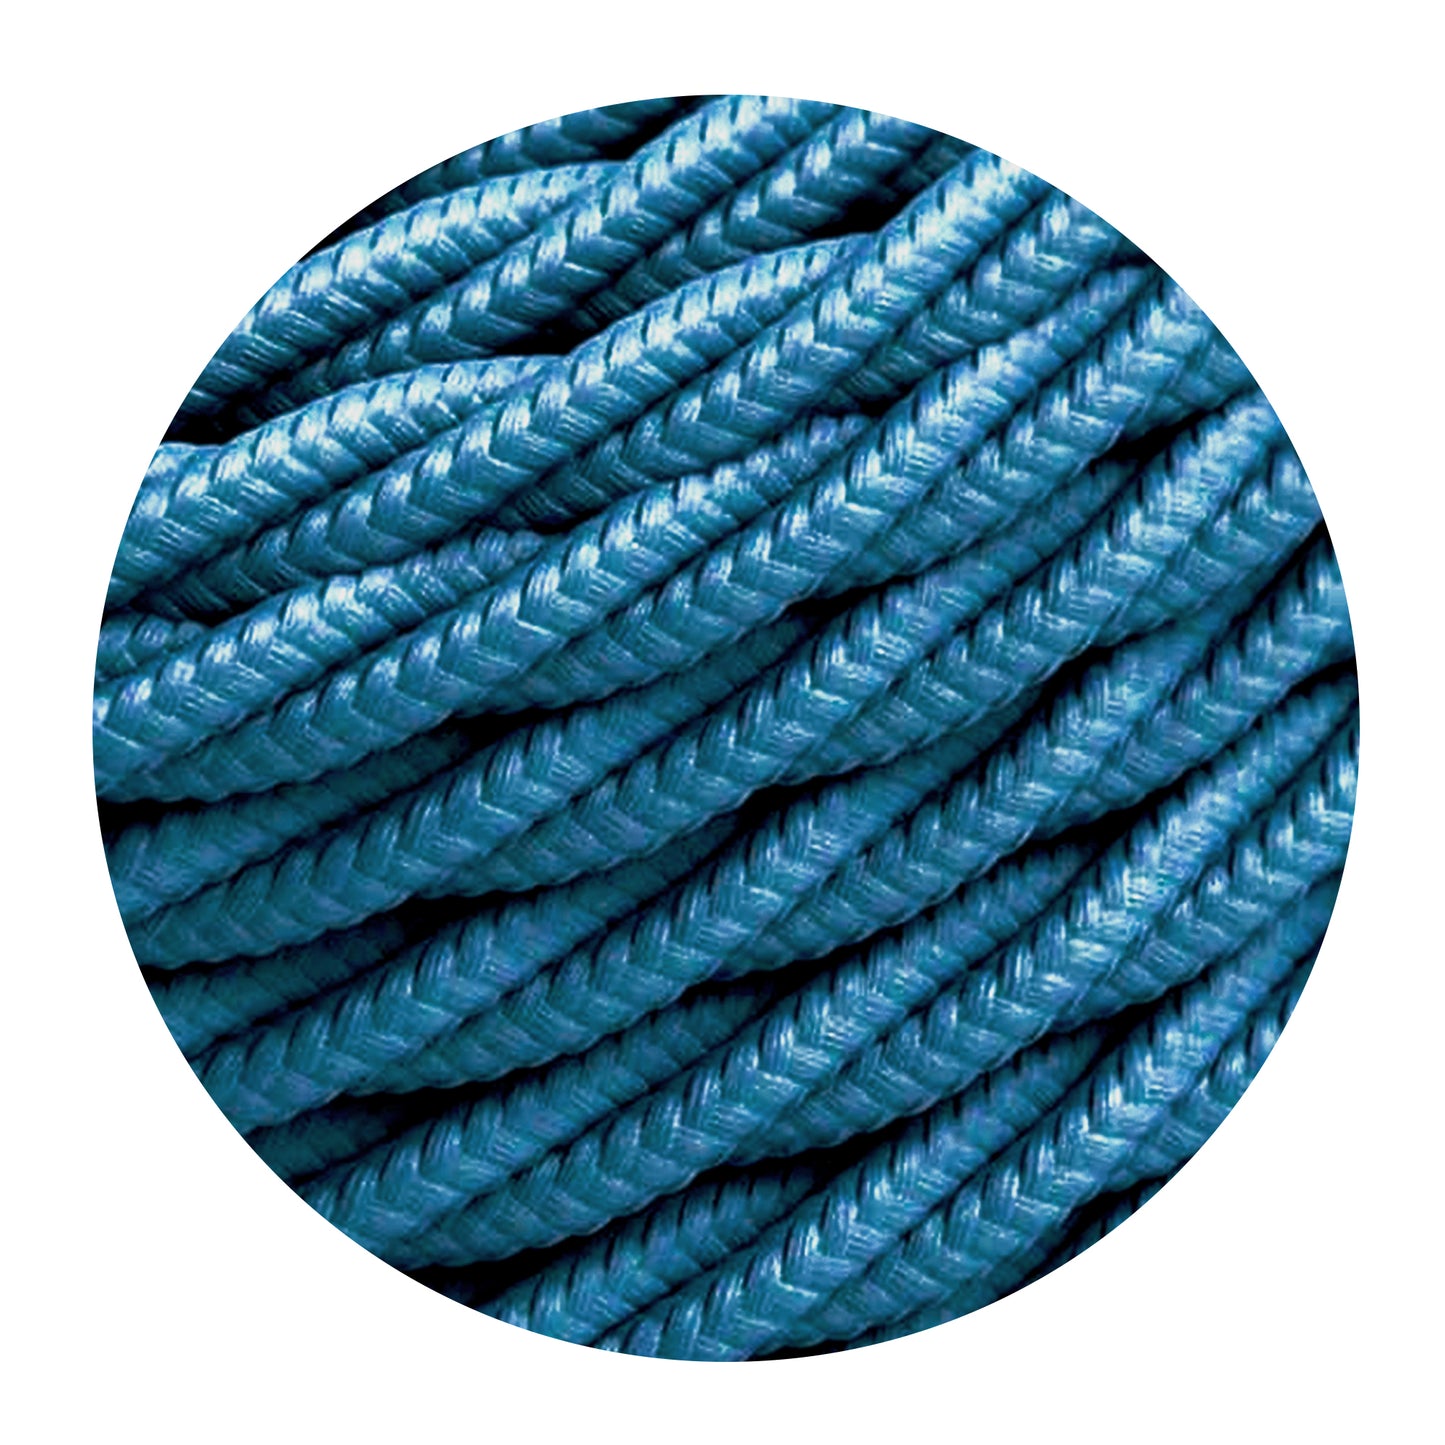 Fabric Cable